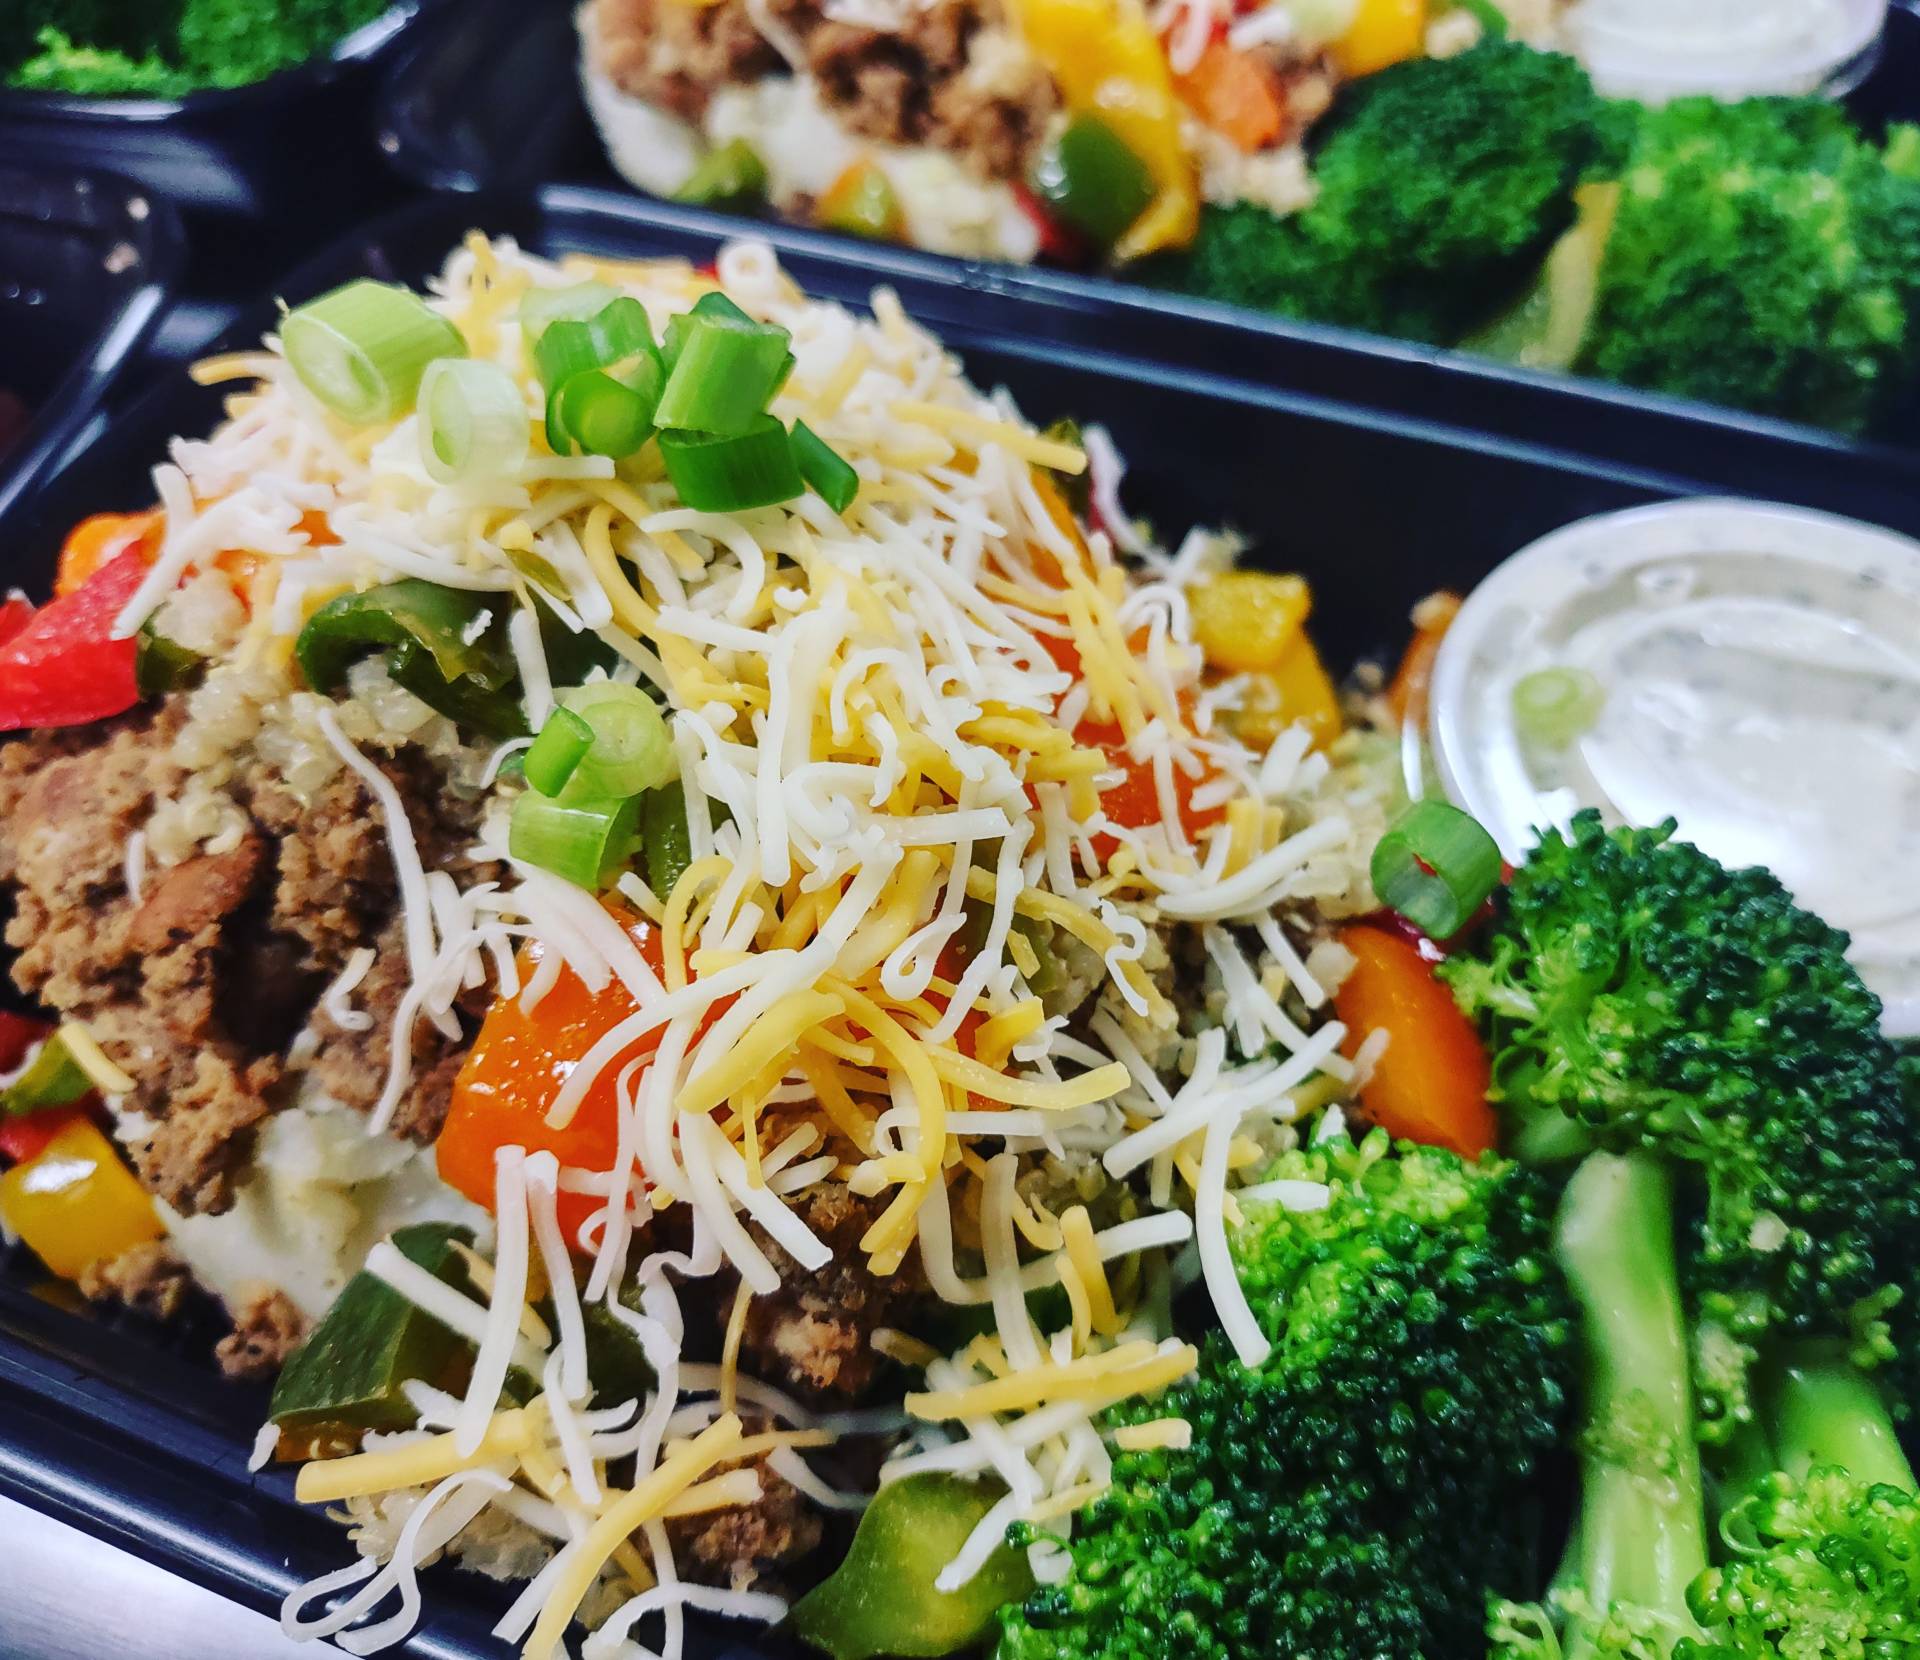 SUPER LEAN-Baked Loaded Sweet Potato w/Seasoned Grass-fed Beef, Roasted Peppers, Blended Cheddar & Green Onions...Fresh Garlic Broccoli.